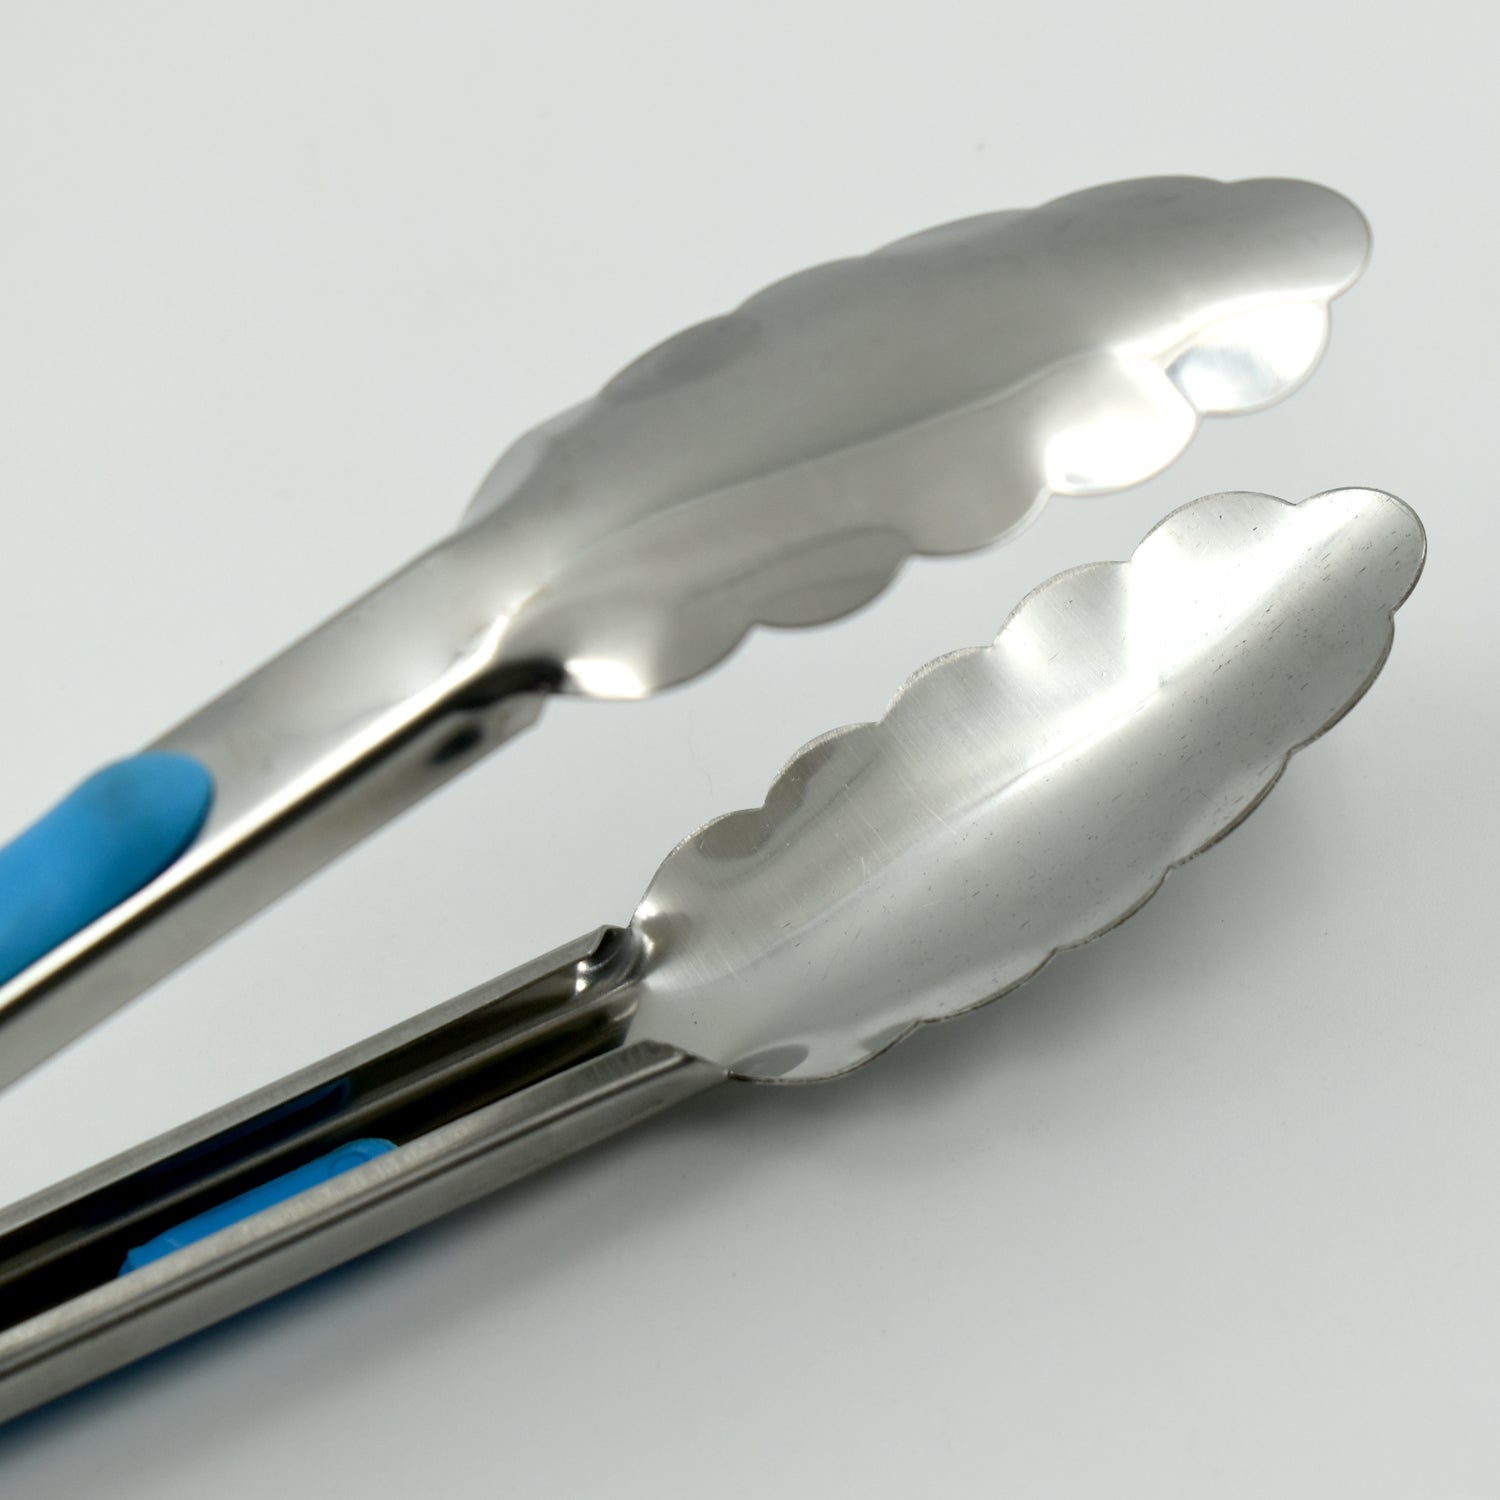 2685 stainless steel food serving tong with Grip Handle.